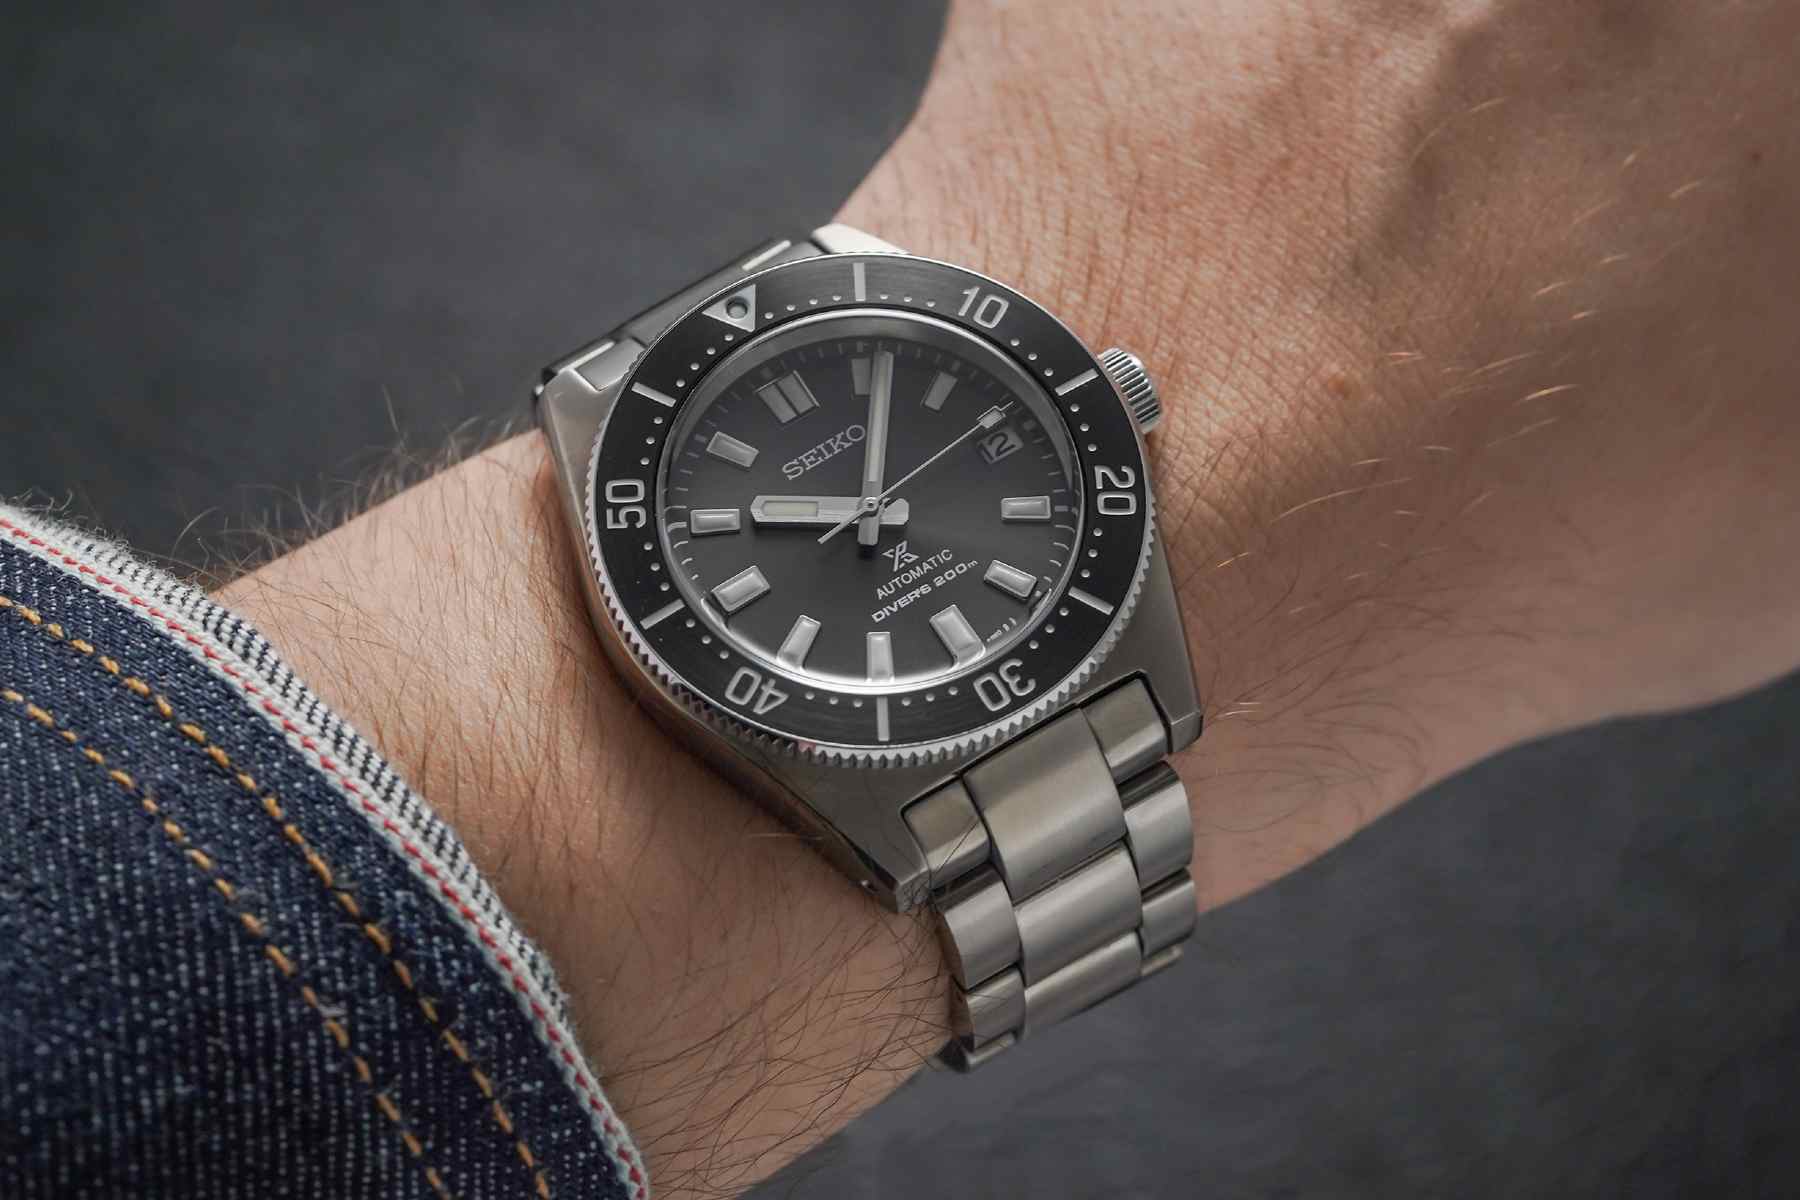 knude kardinal Dingy The 48 Best Seiko Watches - A Complete Guide for 2023 | Teddy Baldassarre